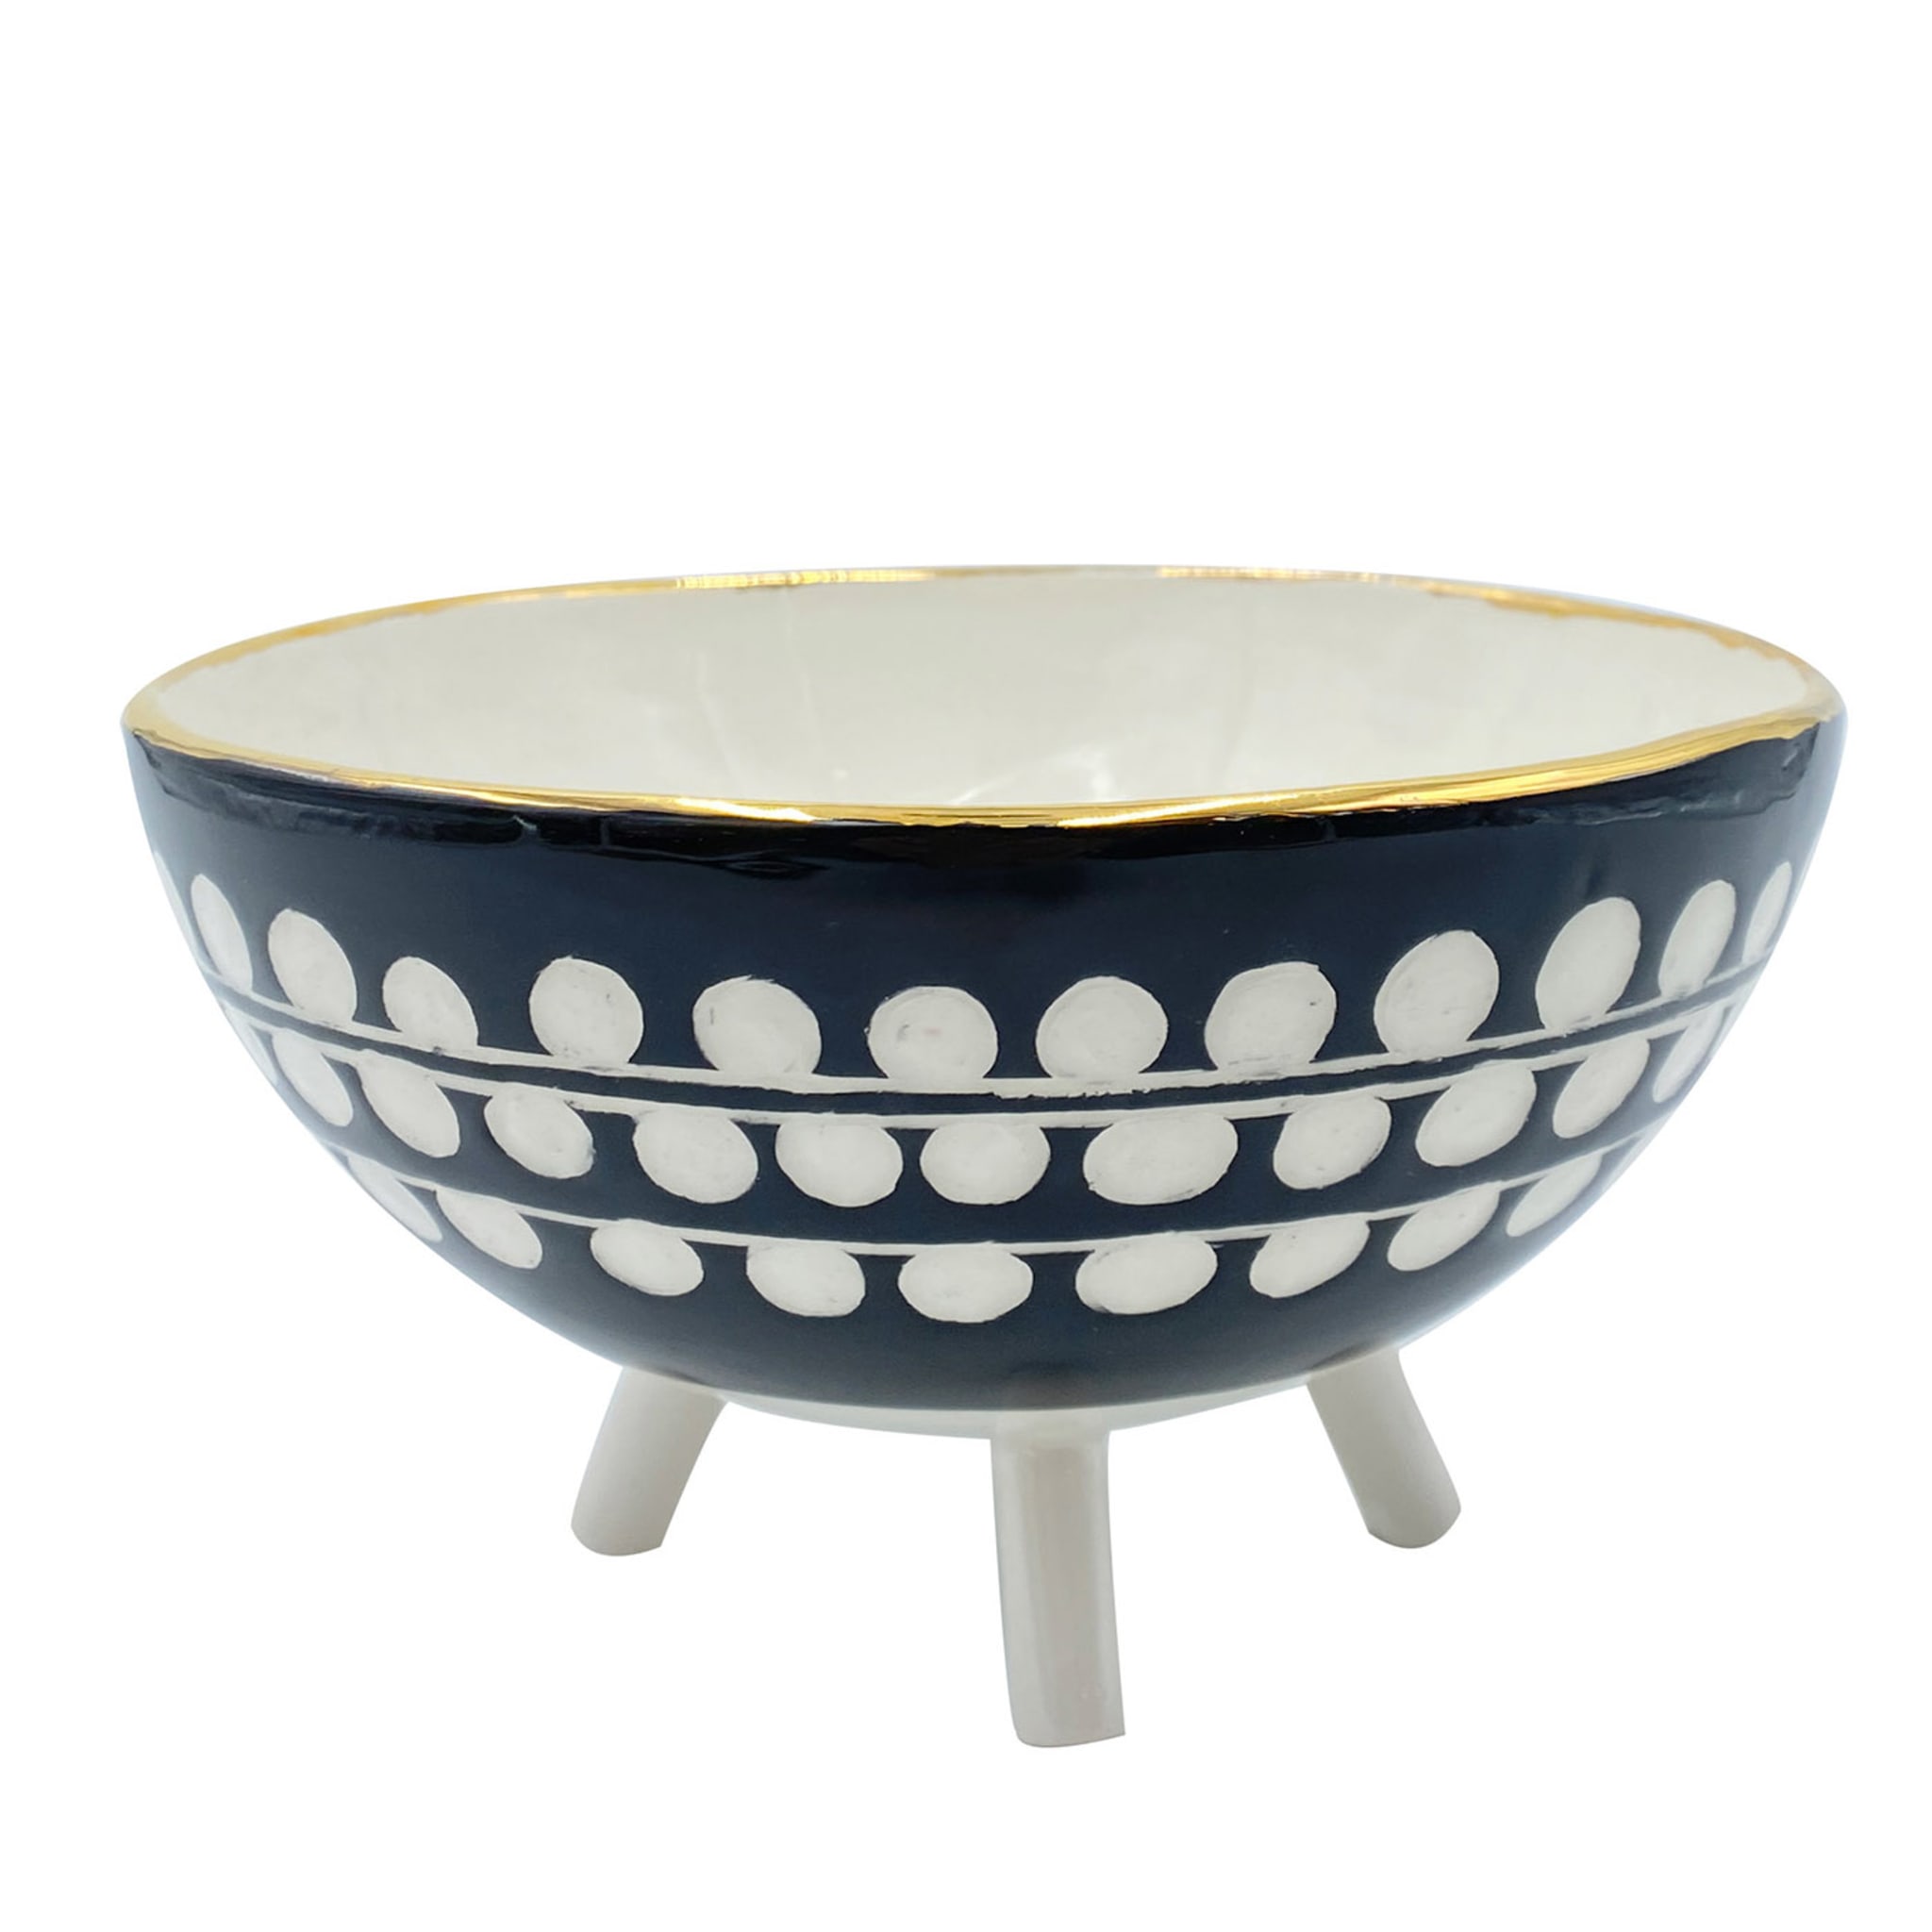 Bouclé Footed Black-And-White Bowl with Gold Rim - Main view